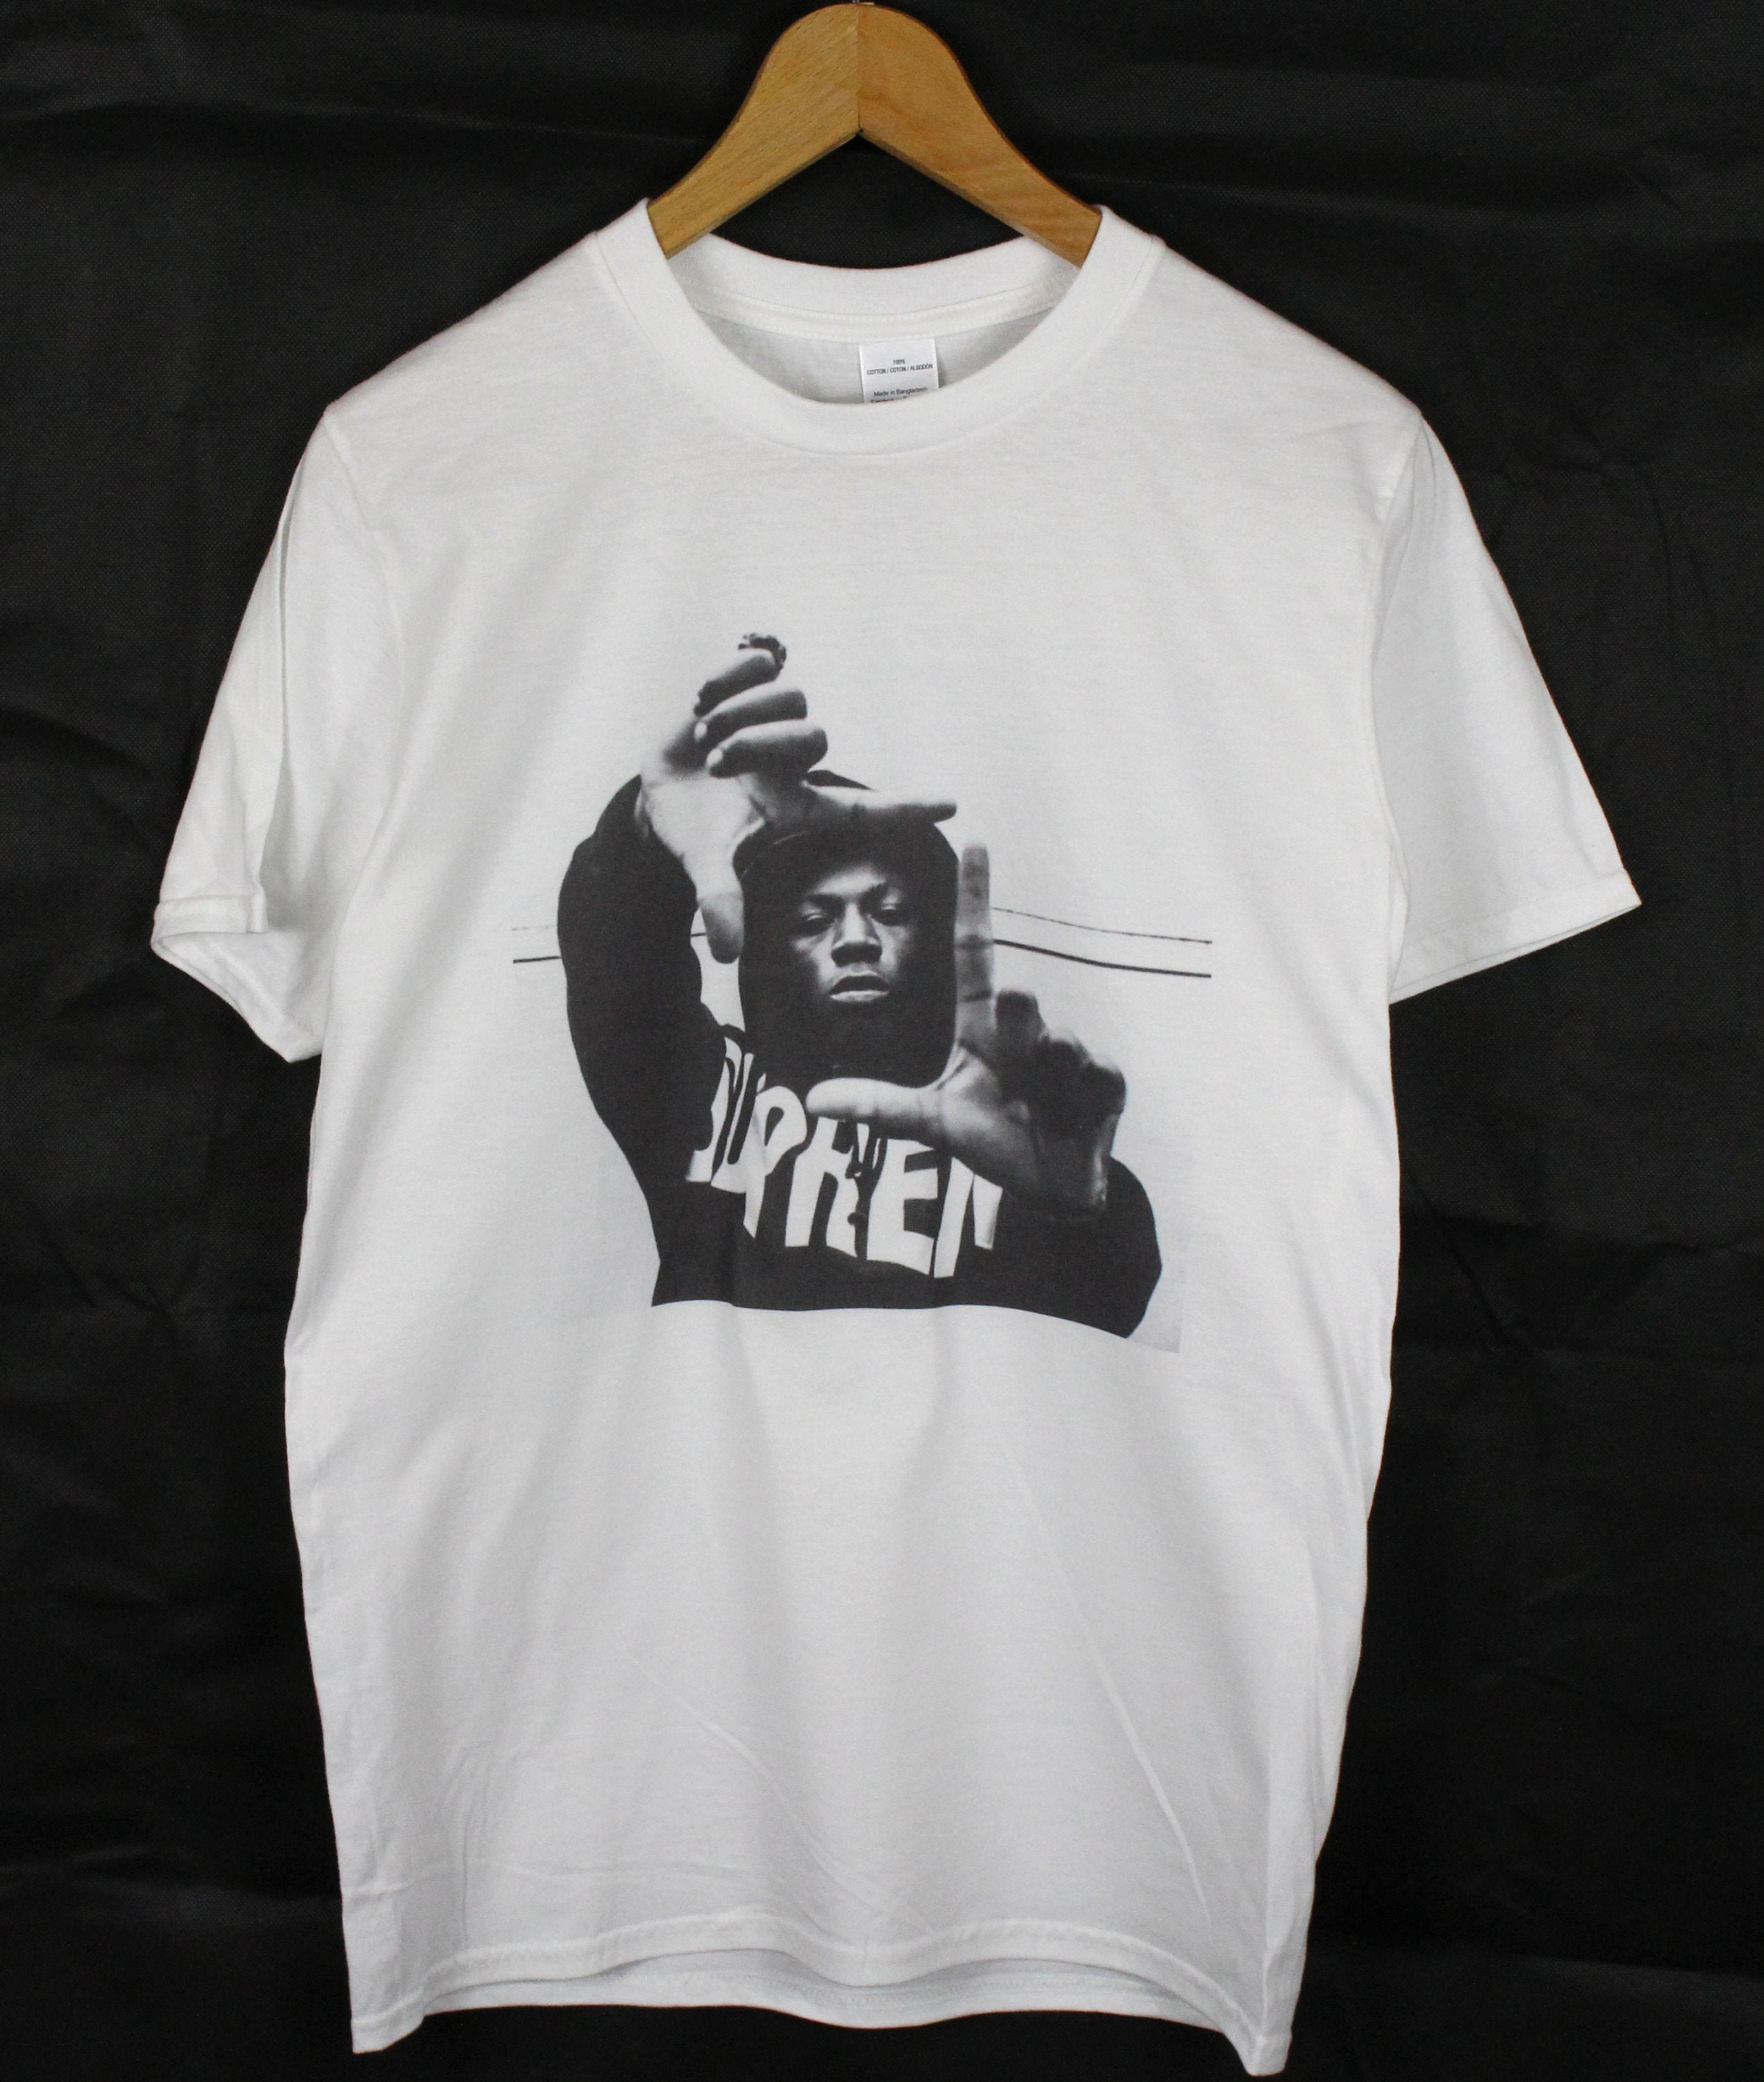 Joey Badass White T-shirt sizes available S-3XL - Etsy 日本